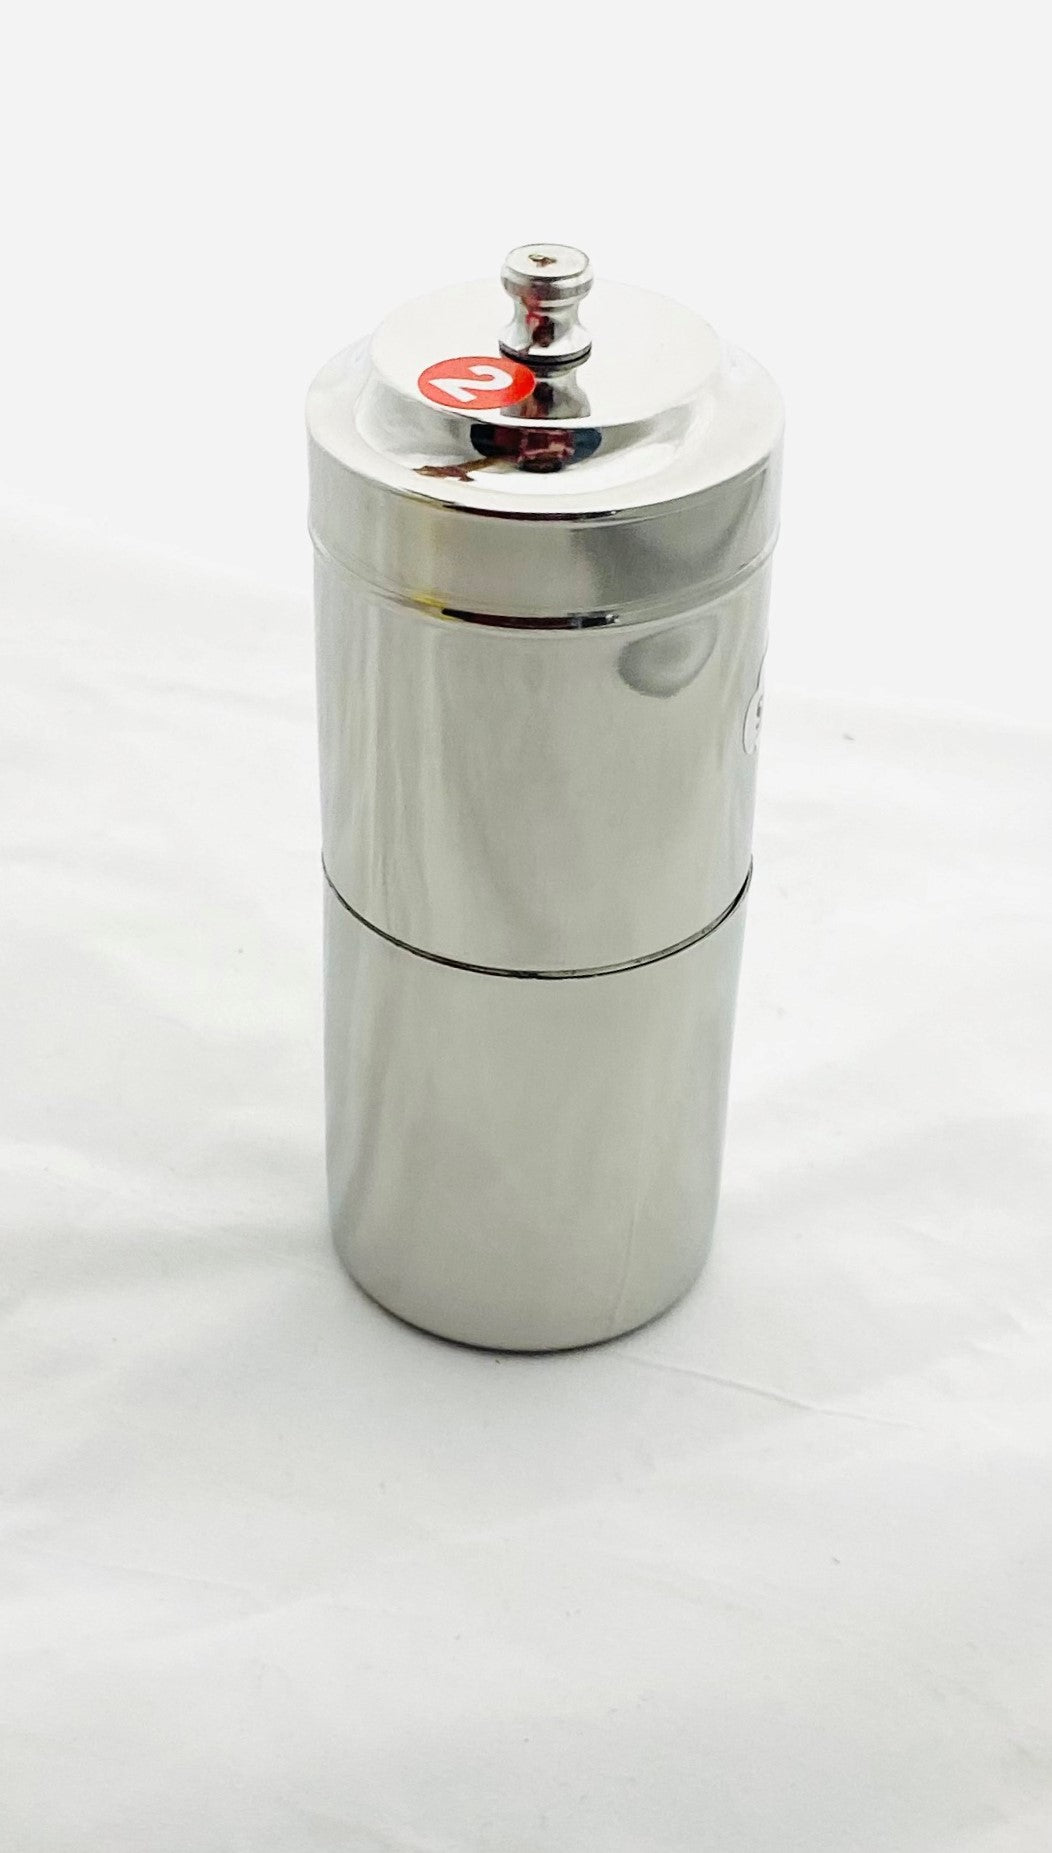 Stainless Steel South Indian Filter Coffee Drip Maker - Diamond